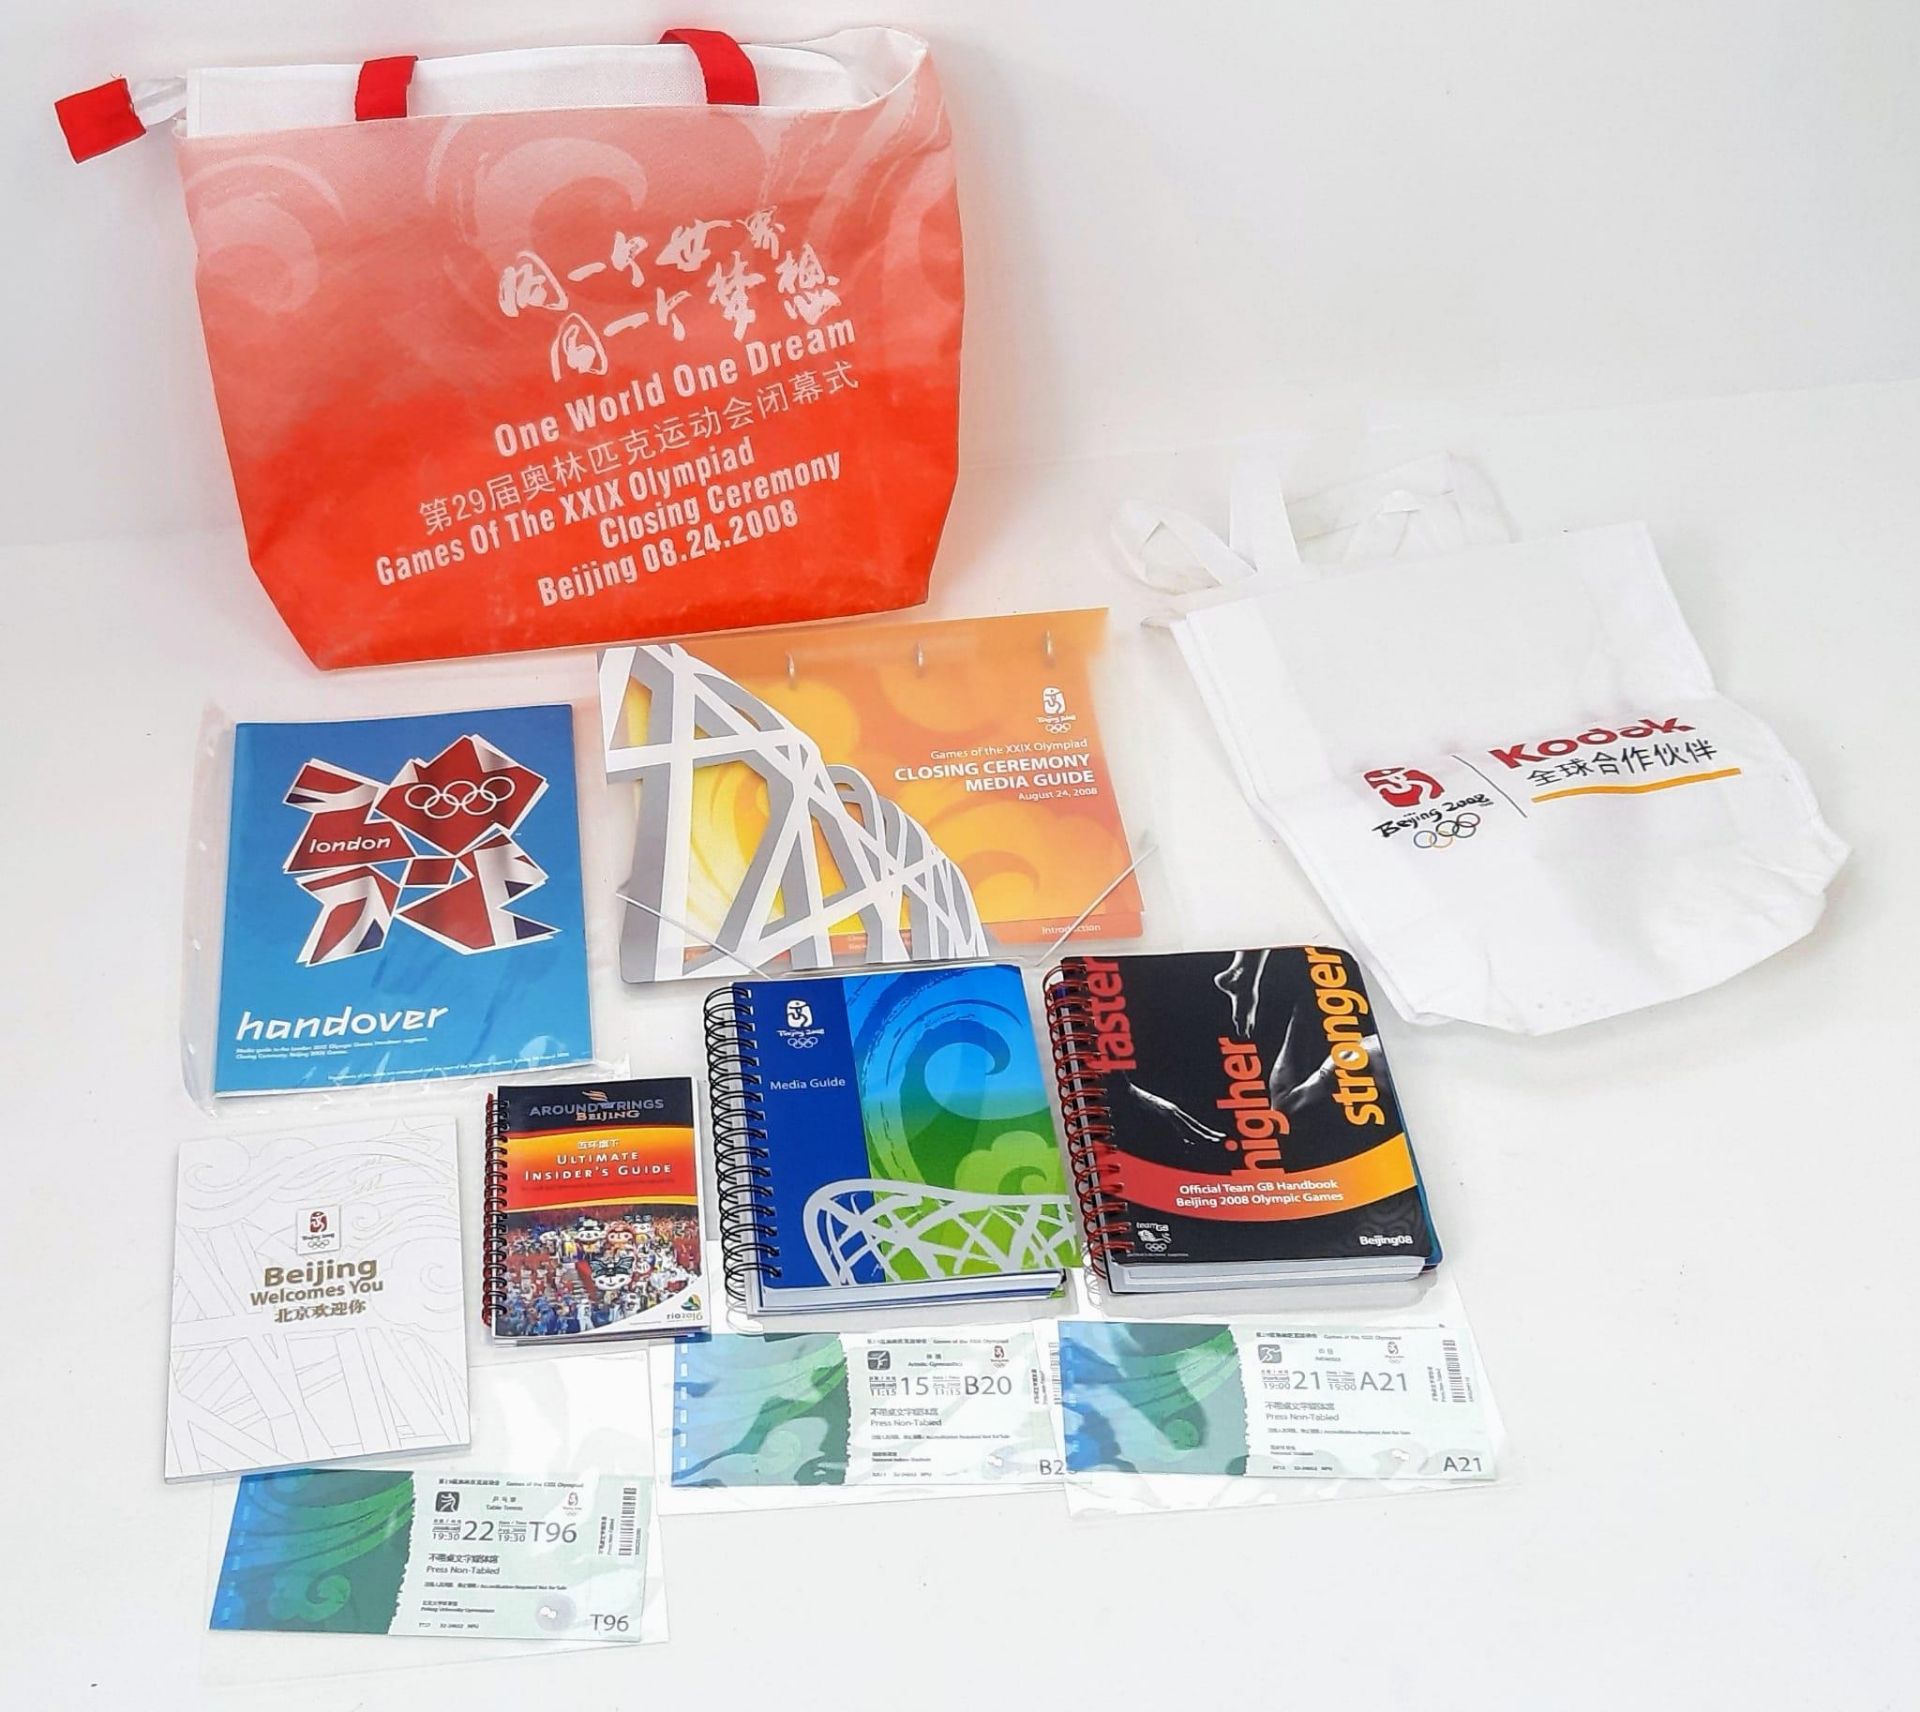 A Beijing 2008 Olympics Press/Media Pack. Includes tickets, brochures and other collectibles.